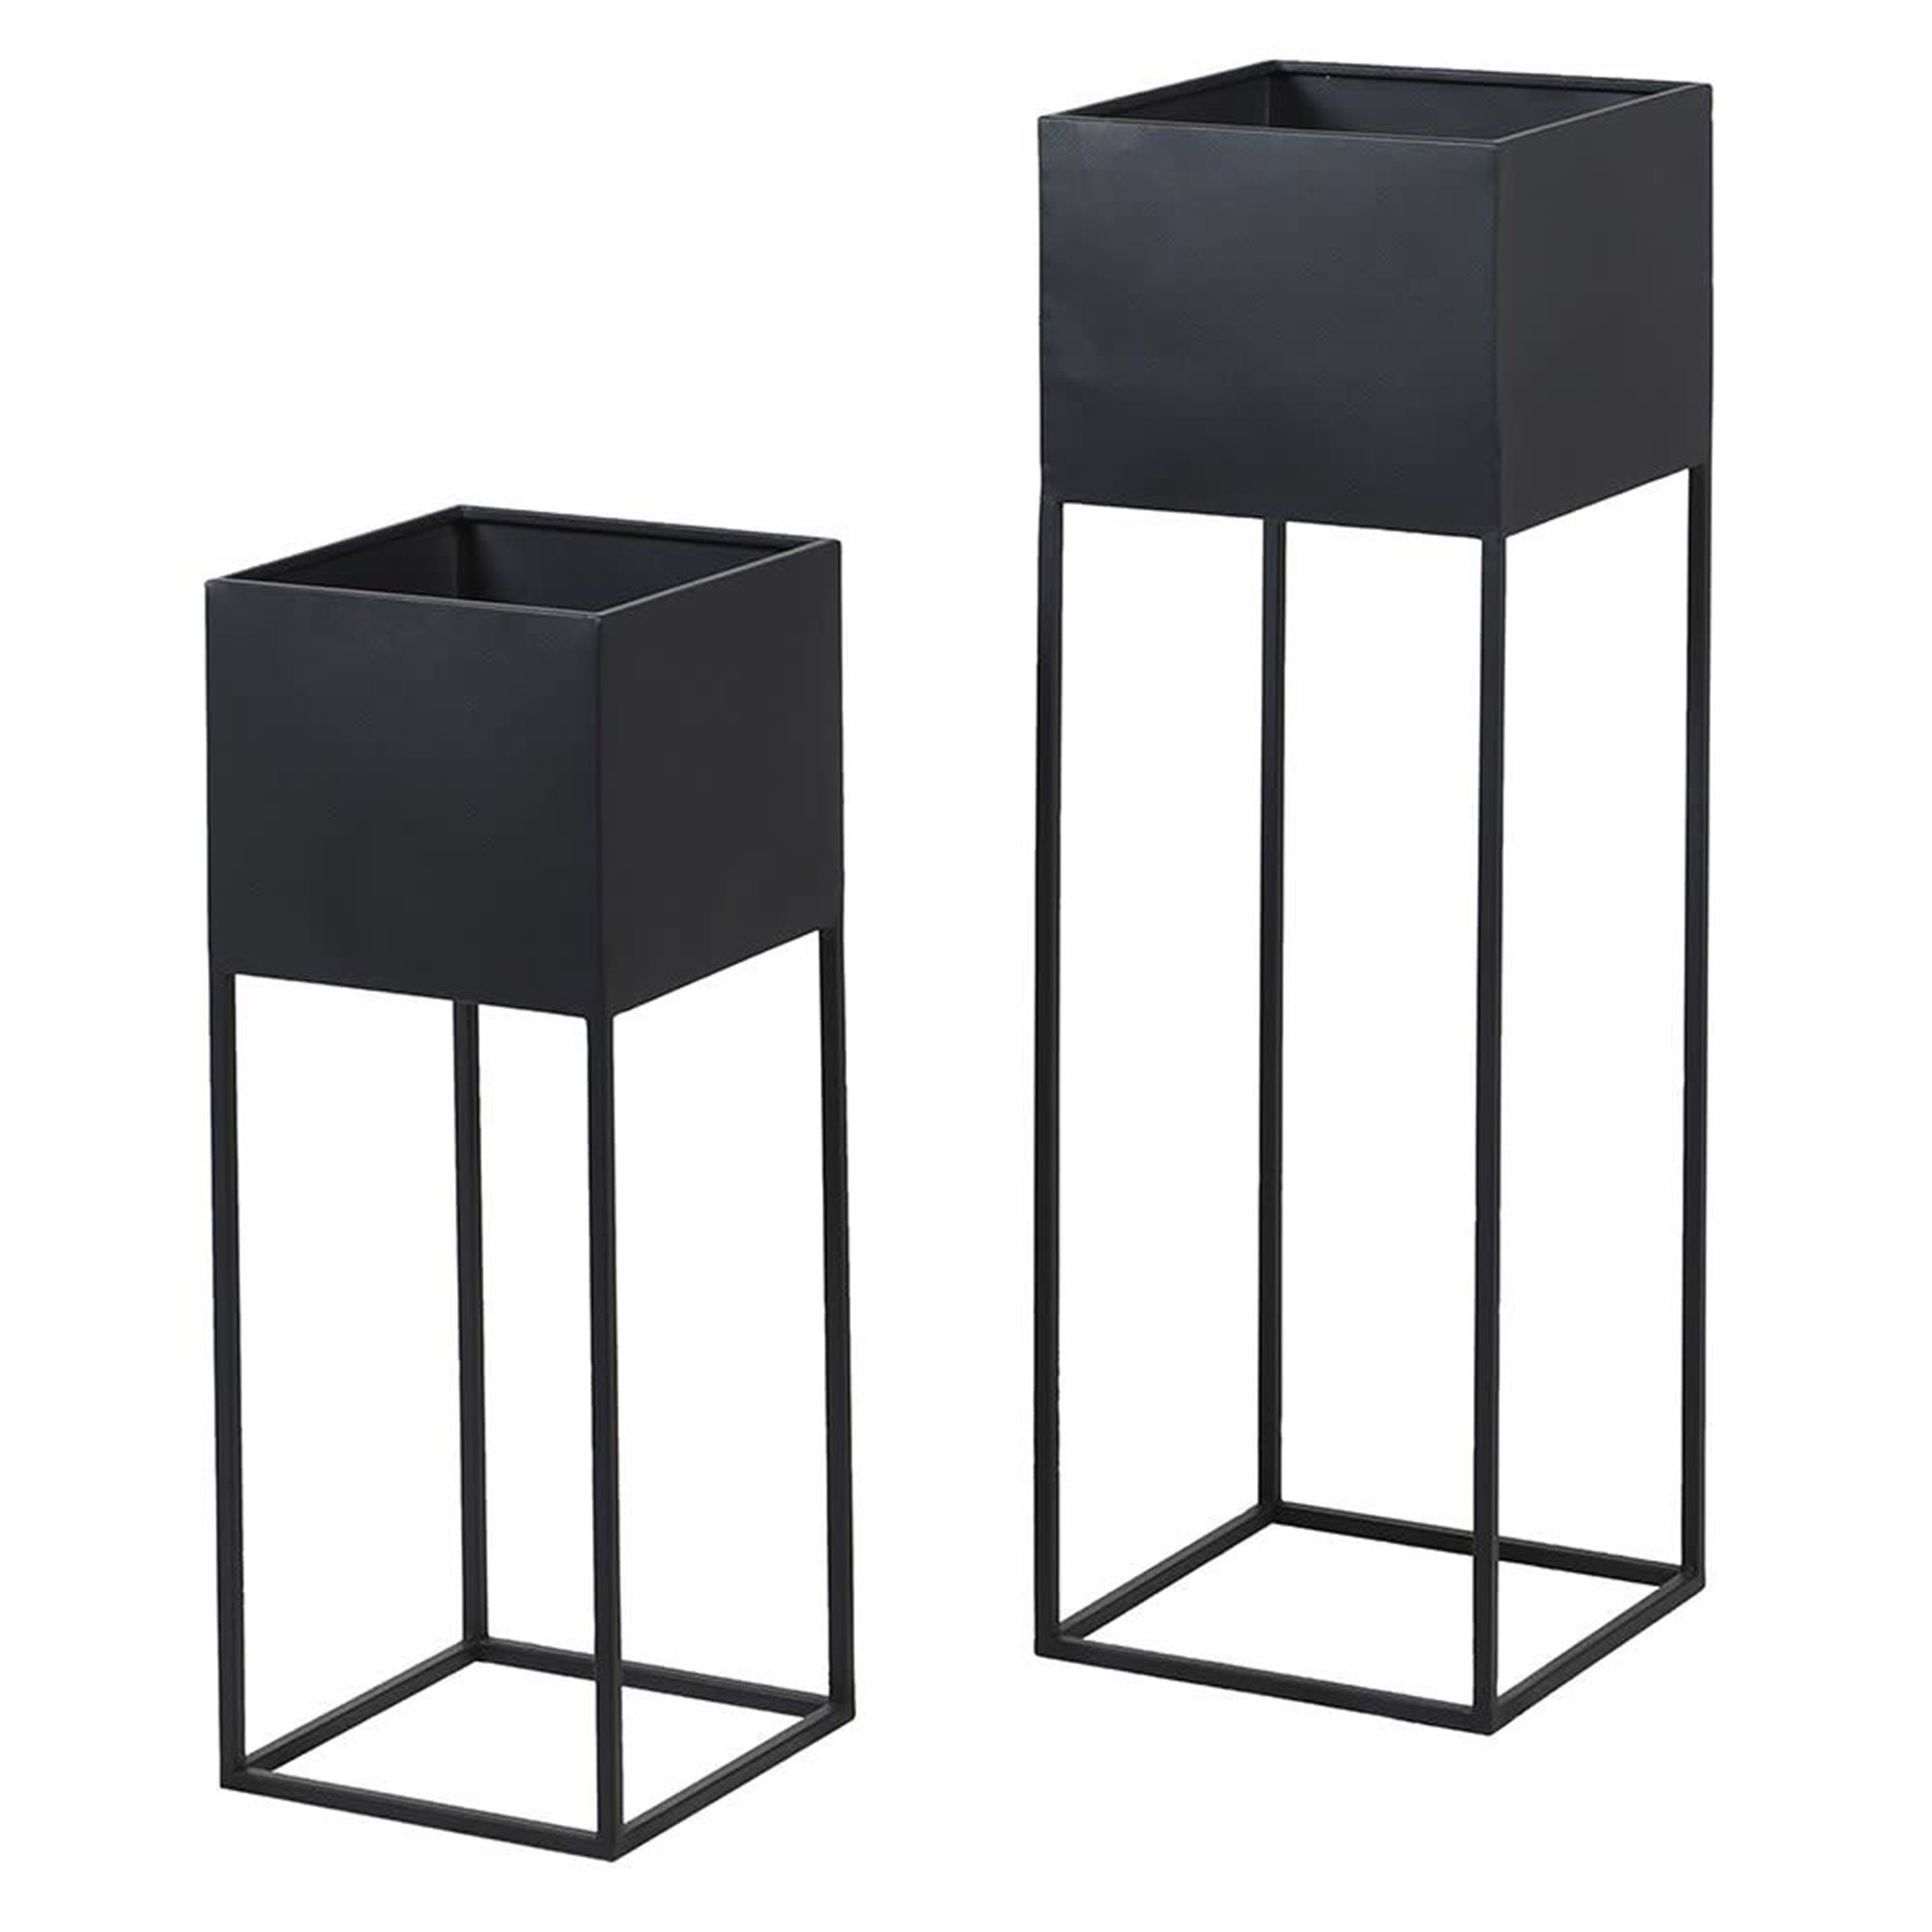 Box Planters on Black Stand - Set of 2